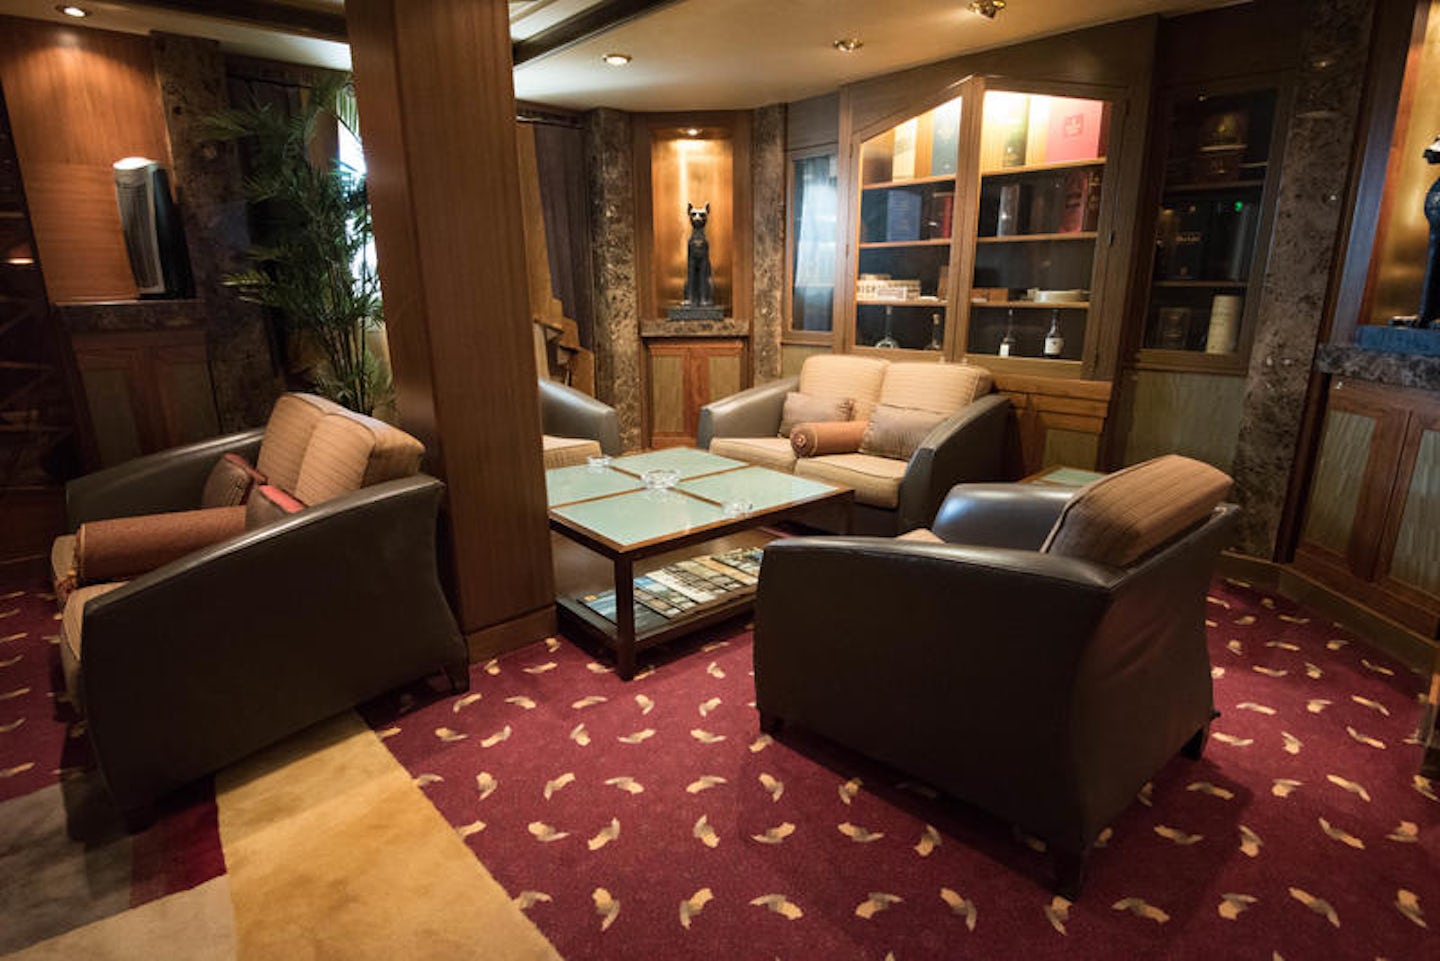 The Connoisseur Club on Freedom of the Seas